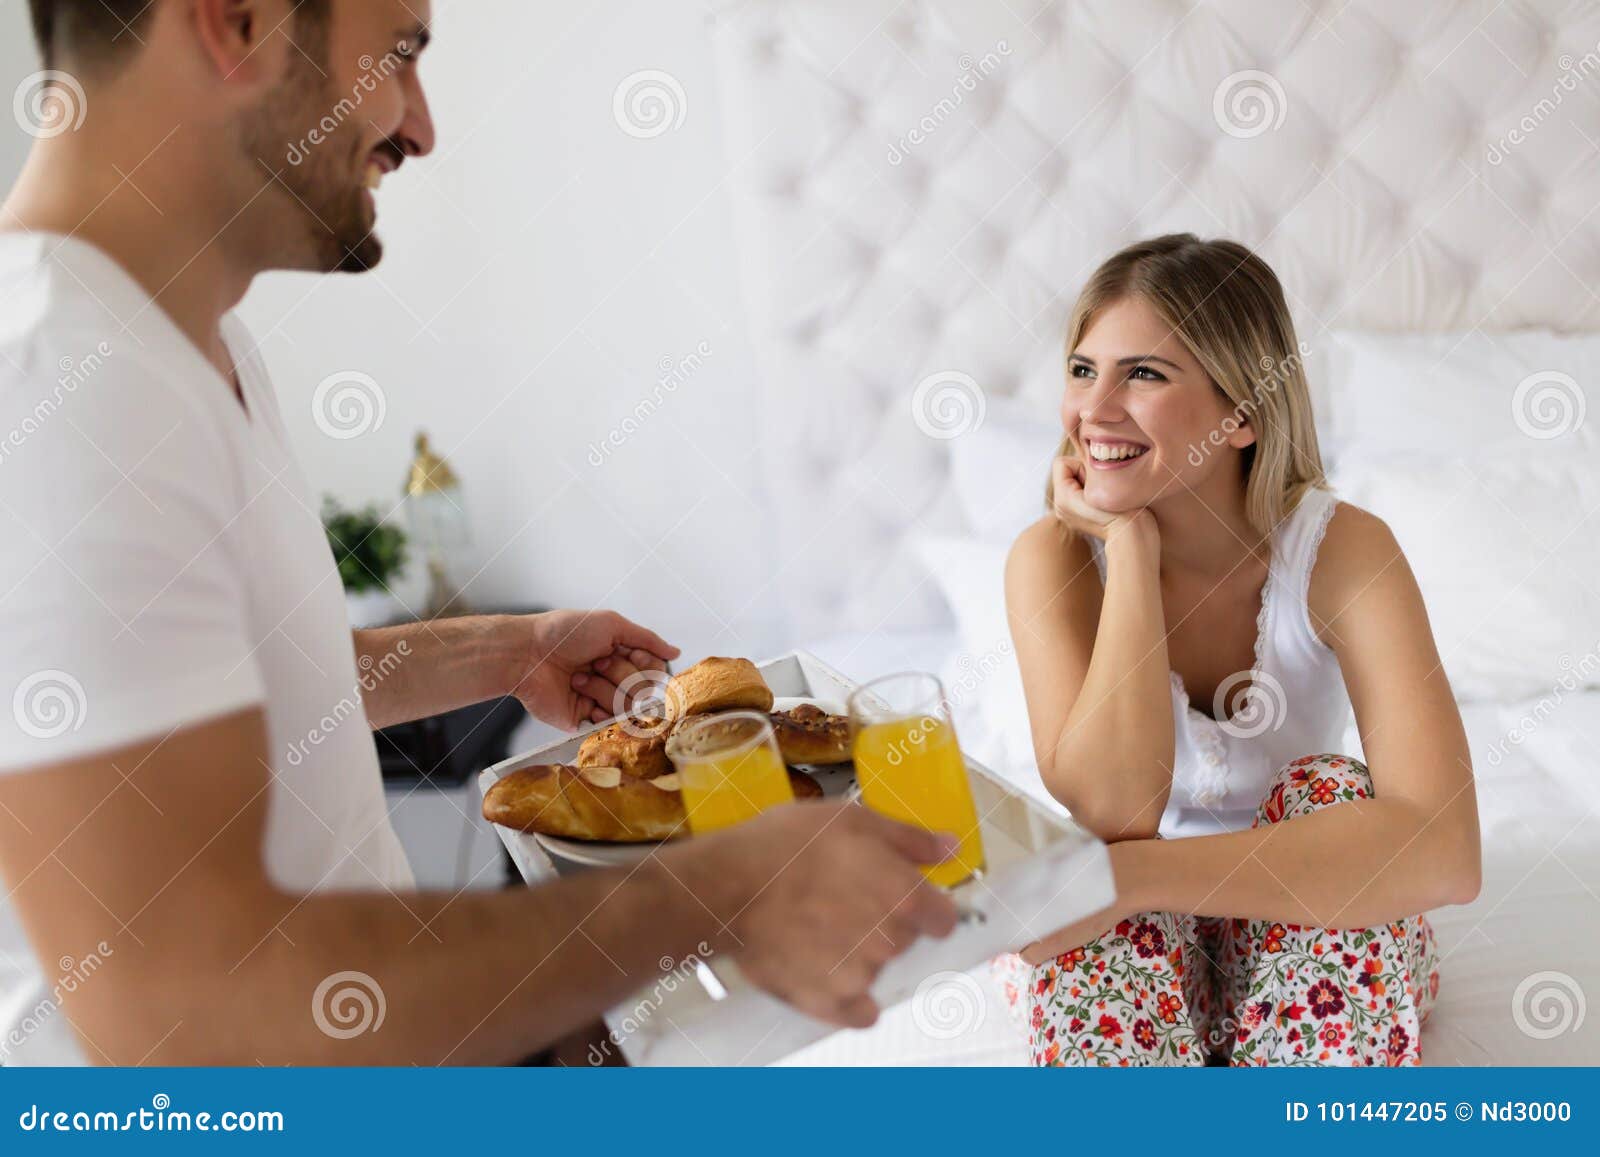 Romantic Husband Waking Wife with Breakfast in Bed Stock Image ...